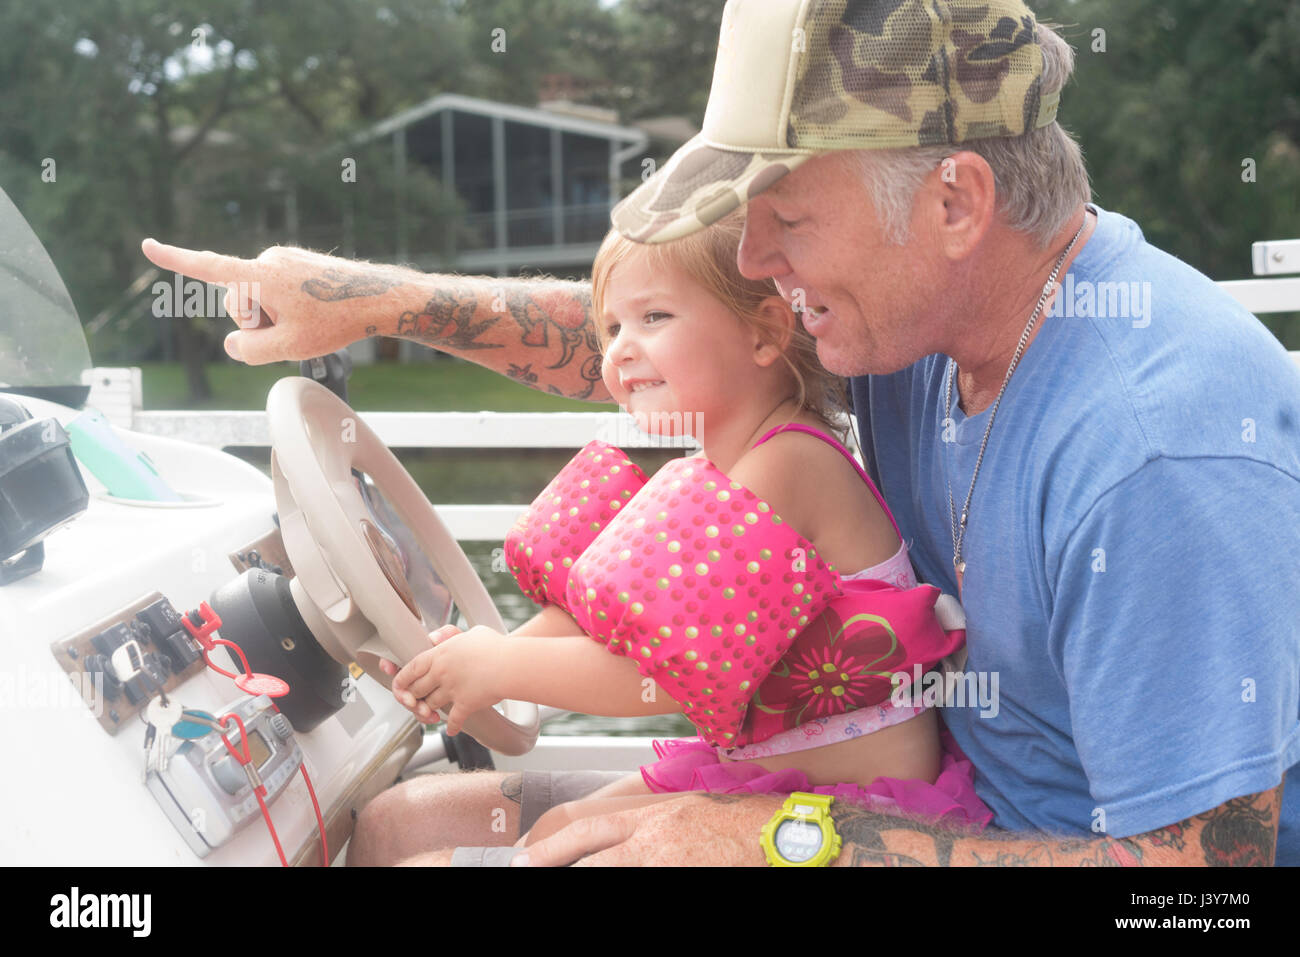 Daughter helping father to steer speed boat, Shalimar, Florida, USA Stock Photo